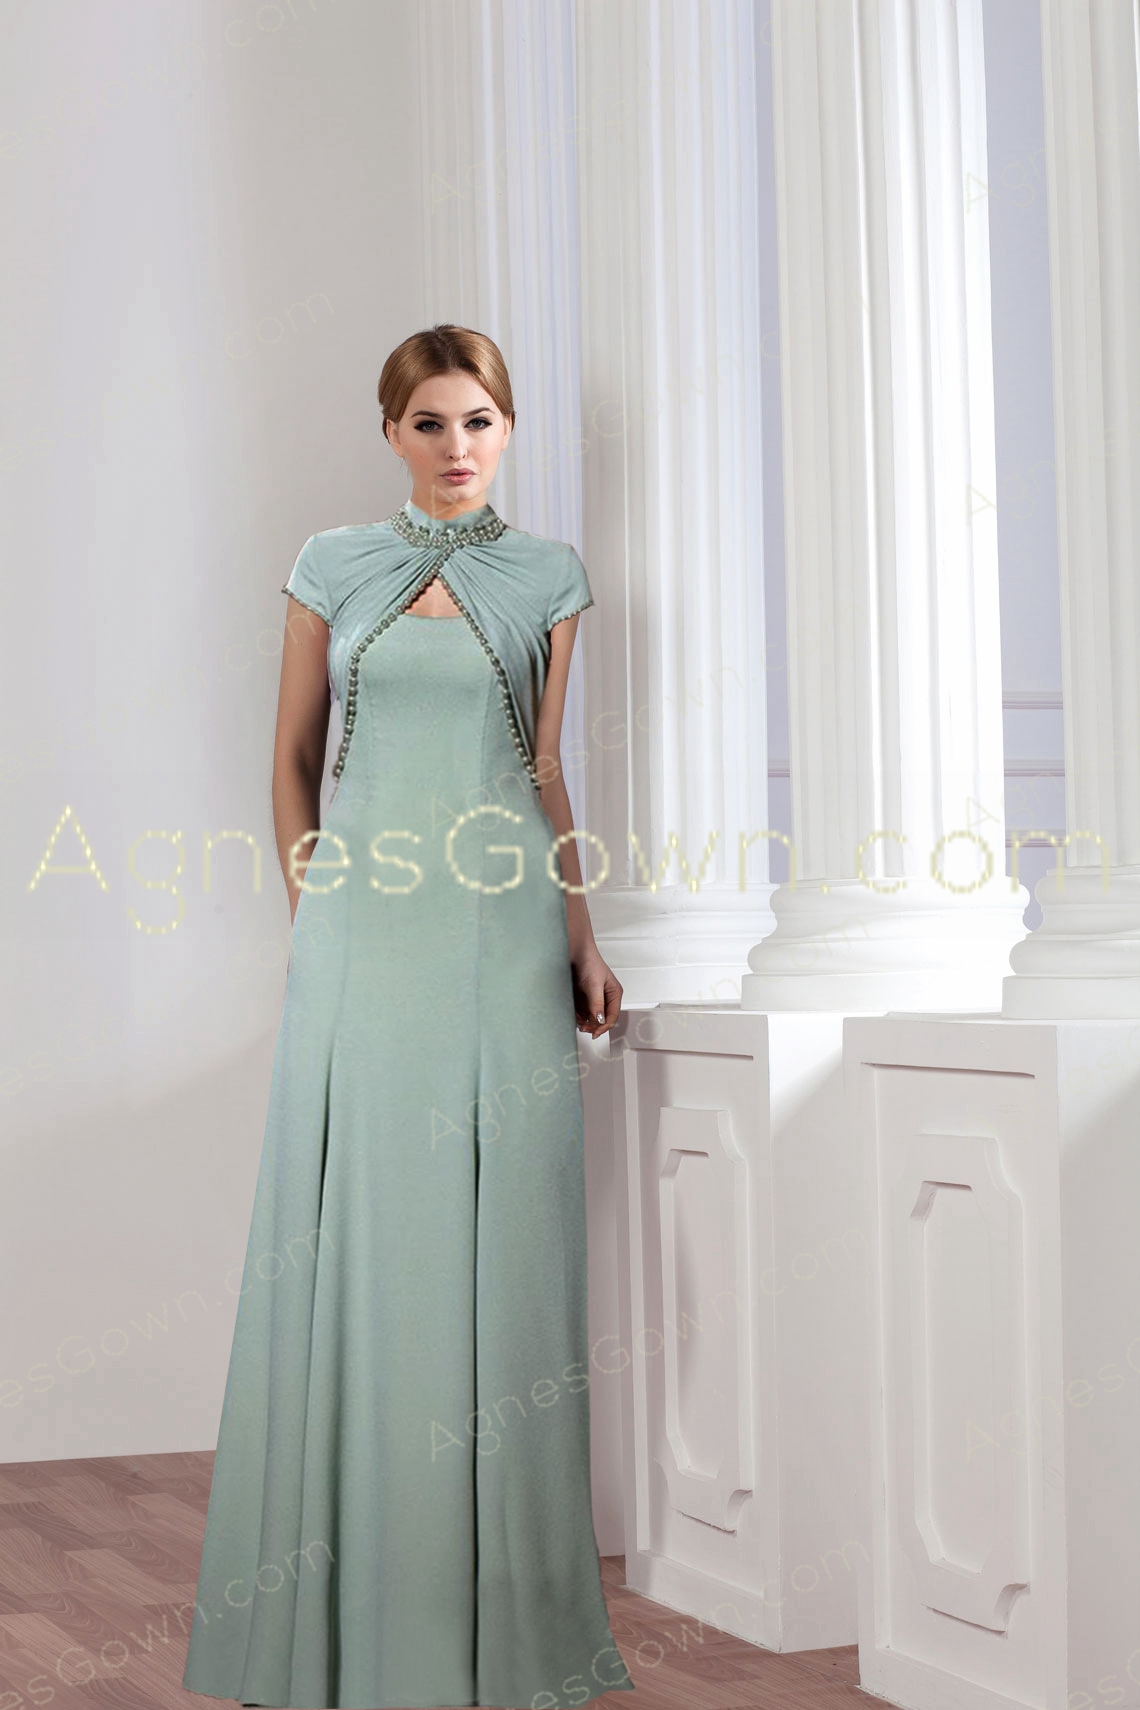 Charming High Neckline Sage Colored Mother Of The Bride Dress 